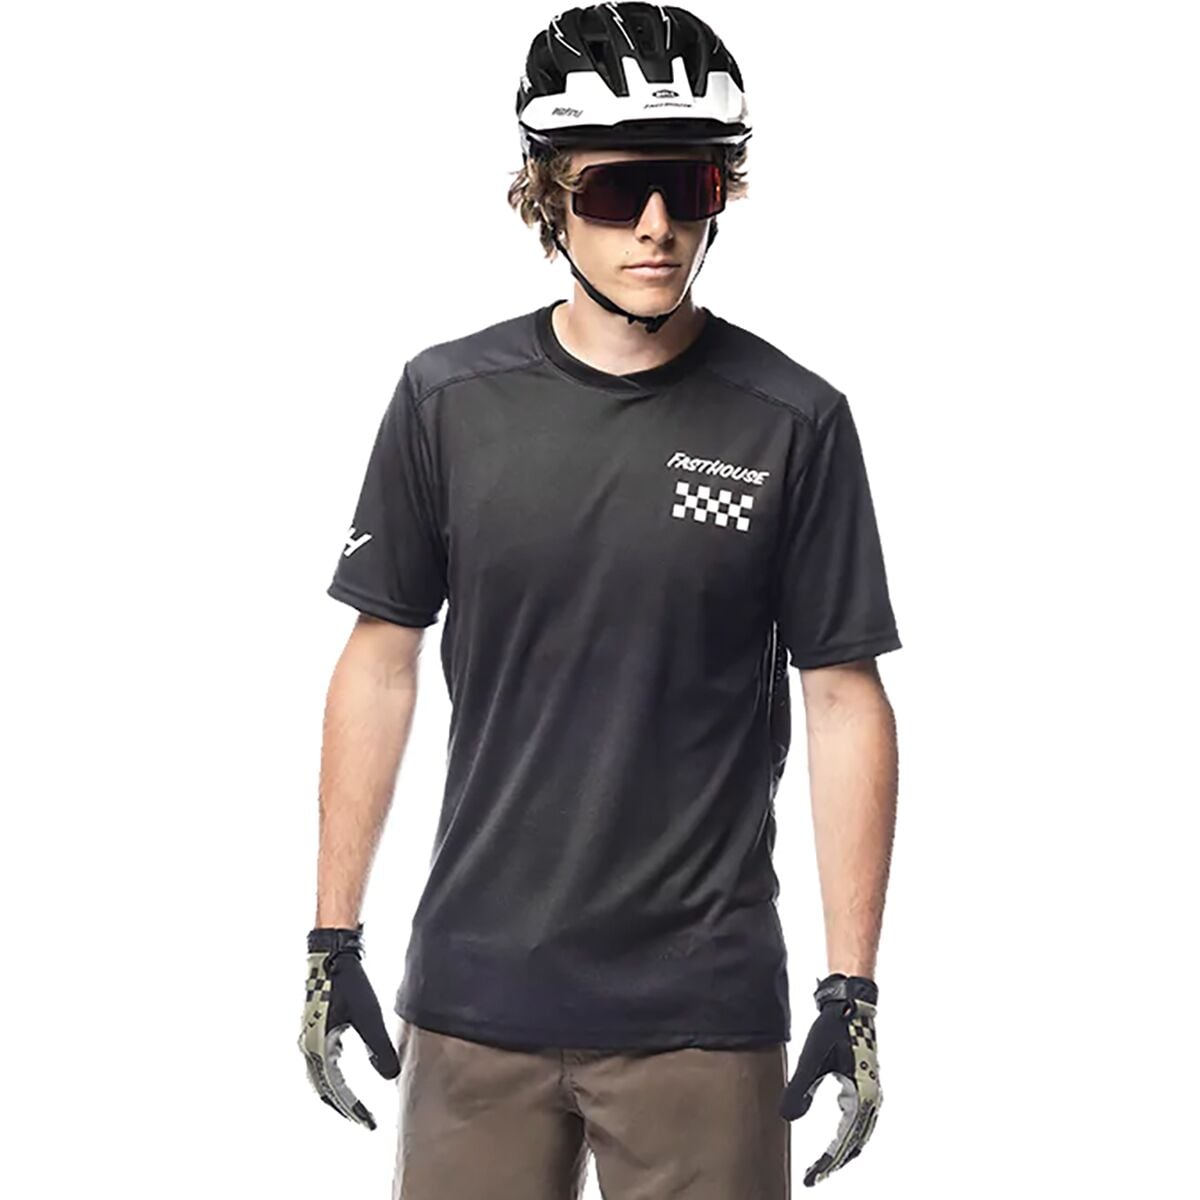 Fasthouse Alloy Rally Short-Sleeve Jersey - Men's